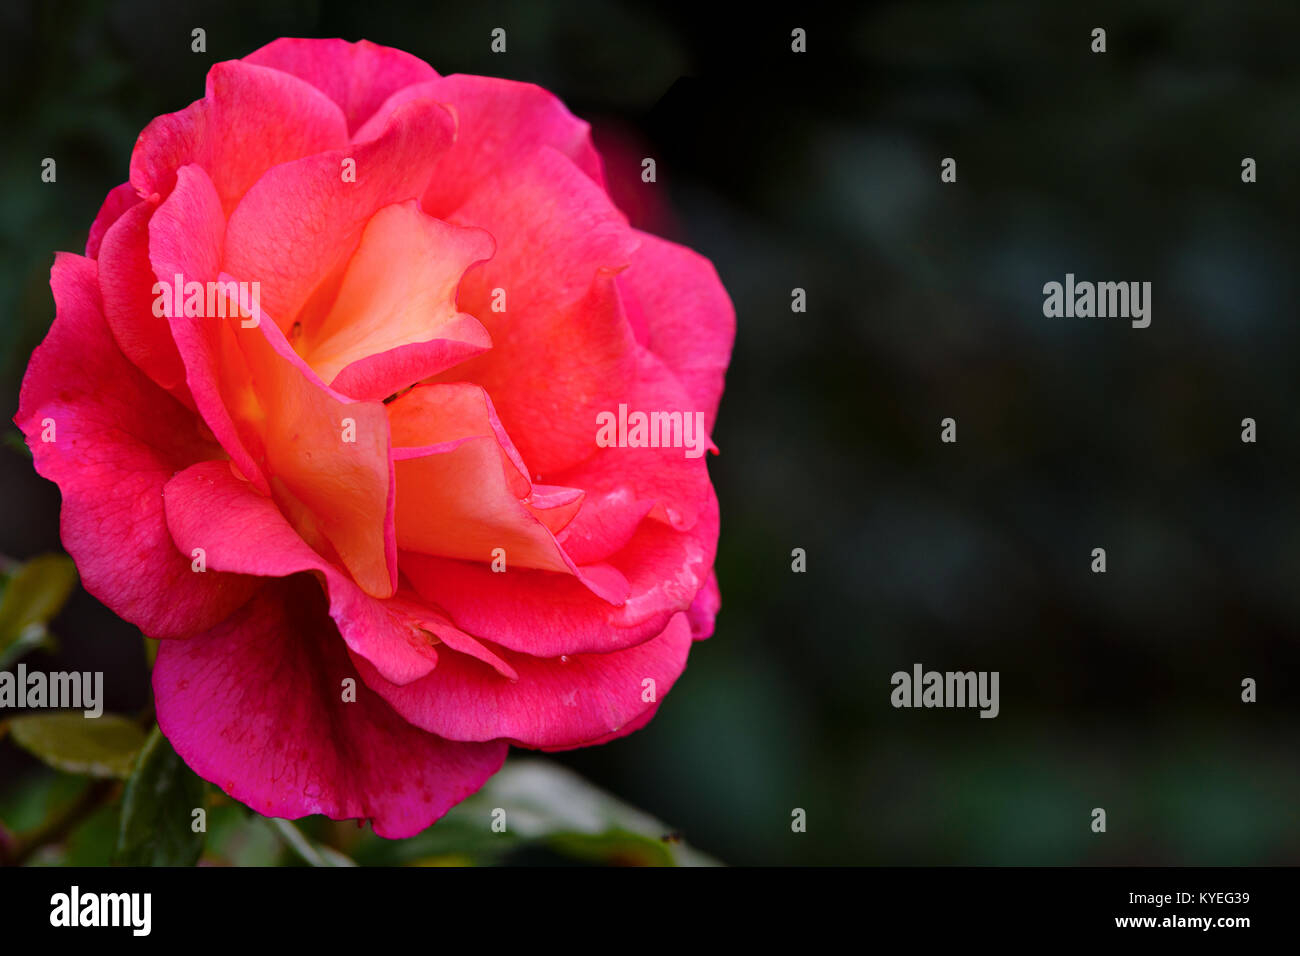 Beautifully blooming pink rose against a blurred background of the garden in close-up (with copy space) Stock Photo